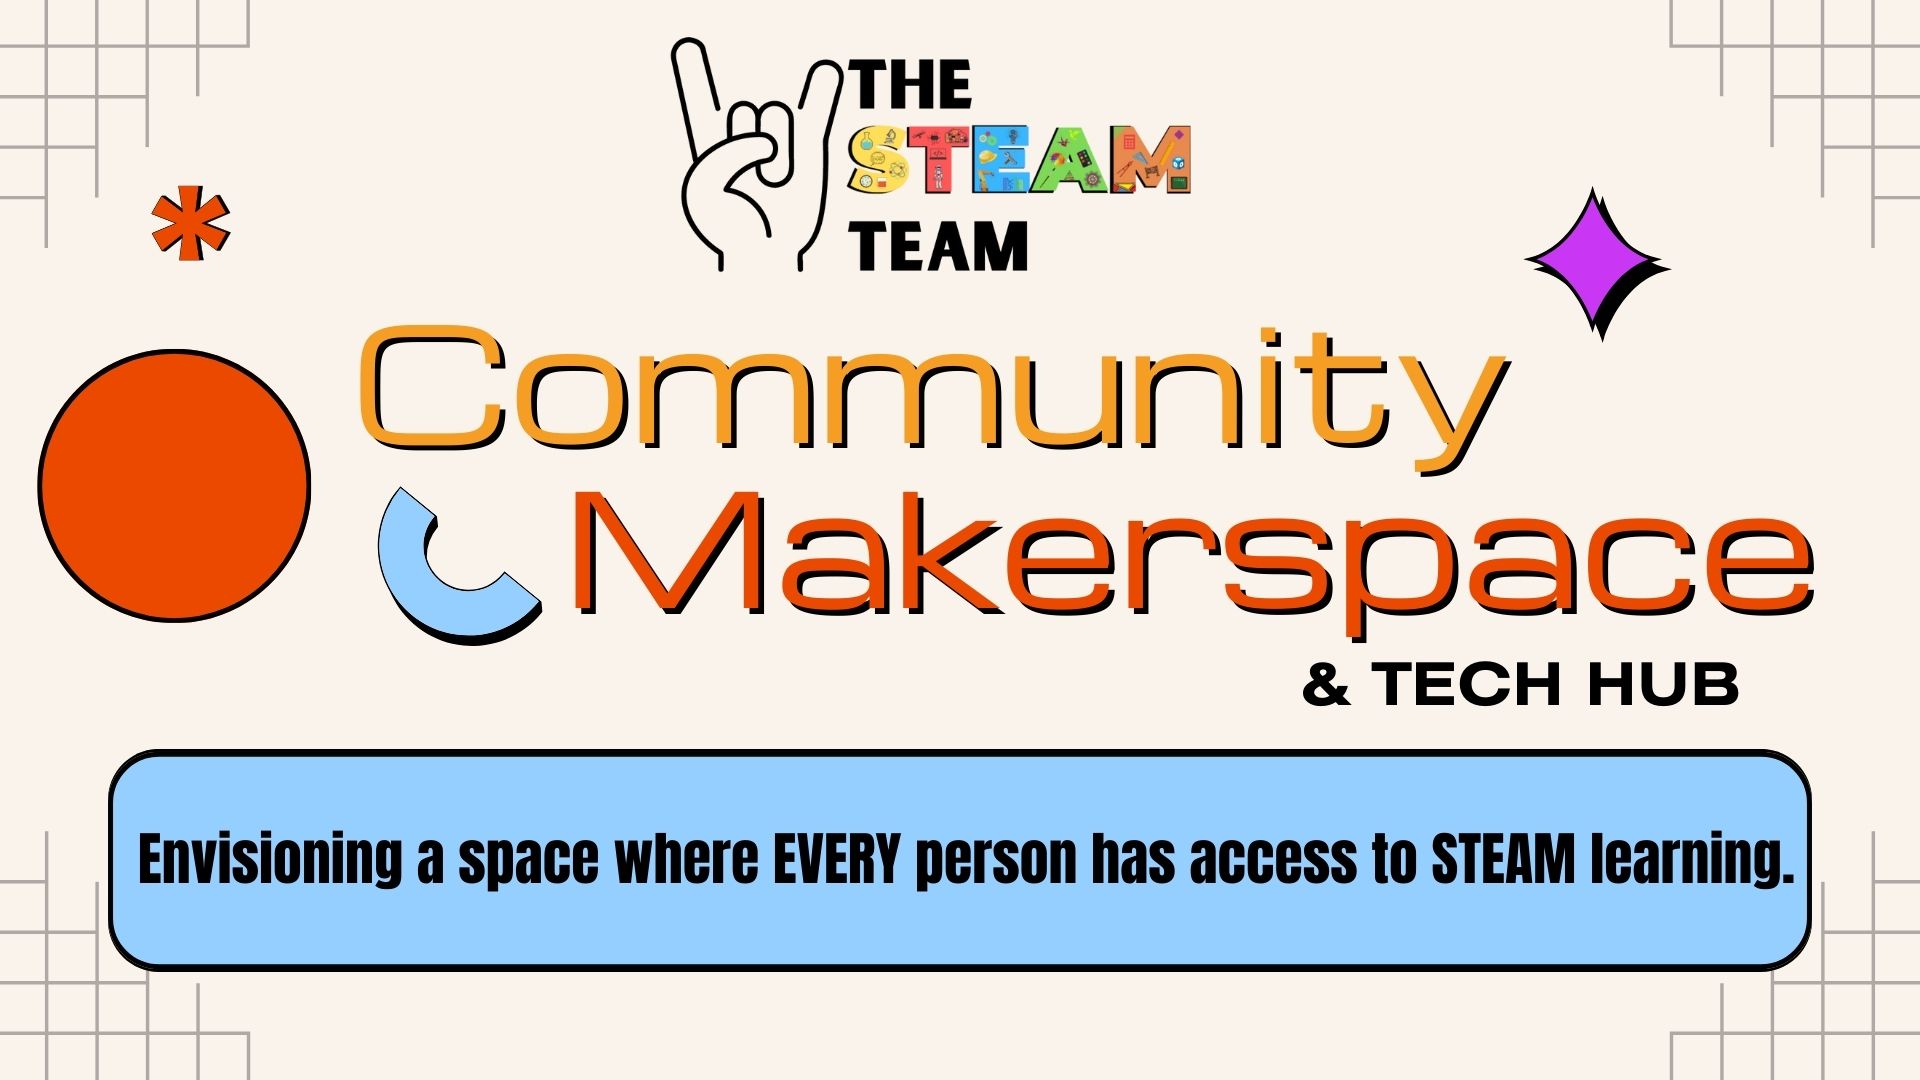 A photo that has a tan background with various shapes that reads "Rock the STEAM Team Community Makerspace & Tech Hub. Envisioning a space where EVERY person has access to STEAM learning."